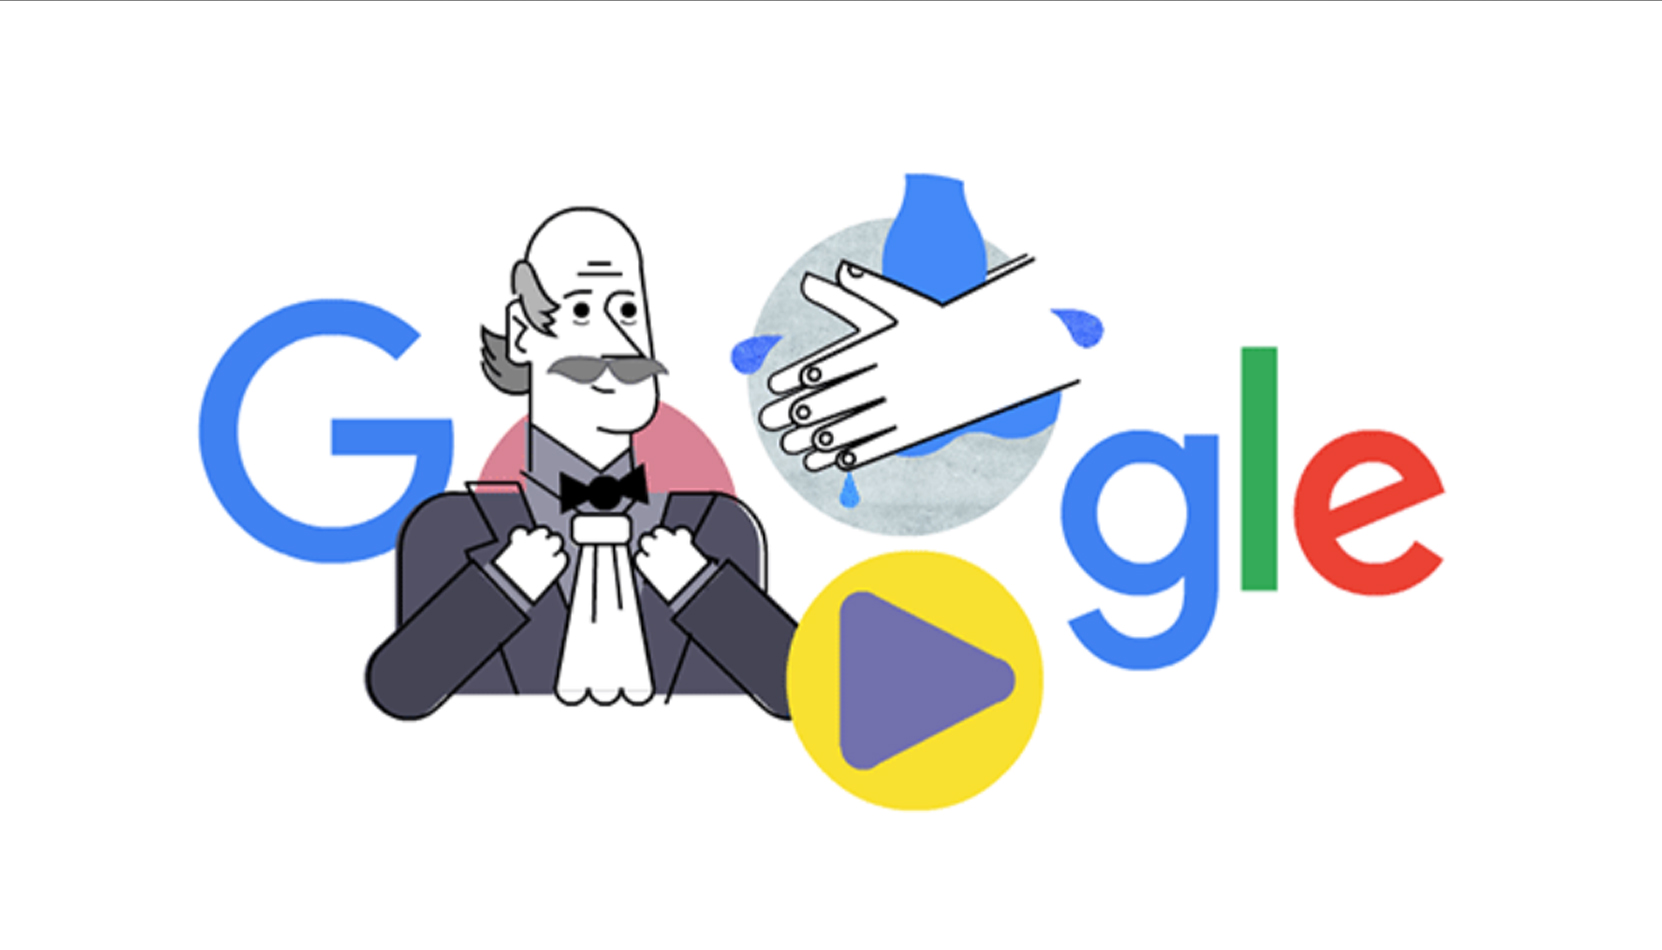 Google Doodle honours Ignaz Semmelweis who first discovered power of handwashing